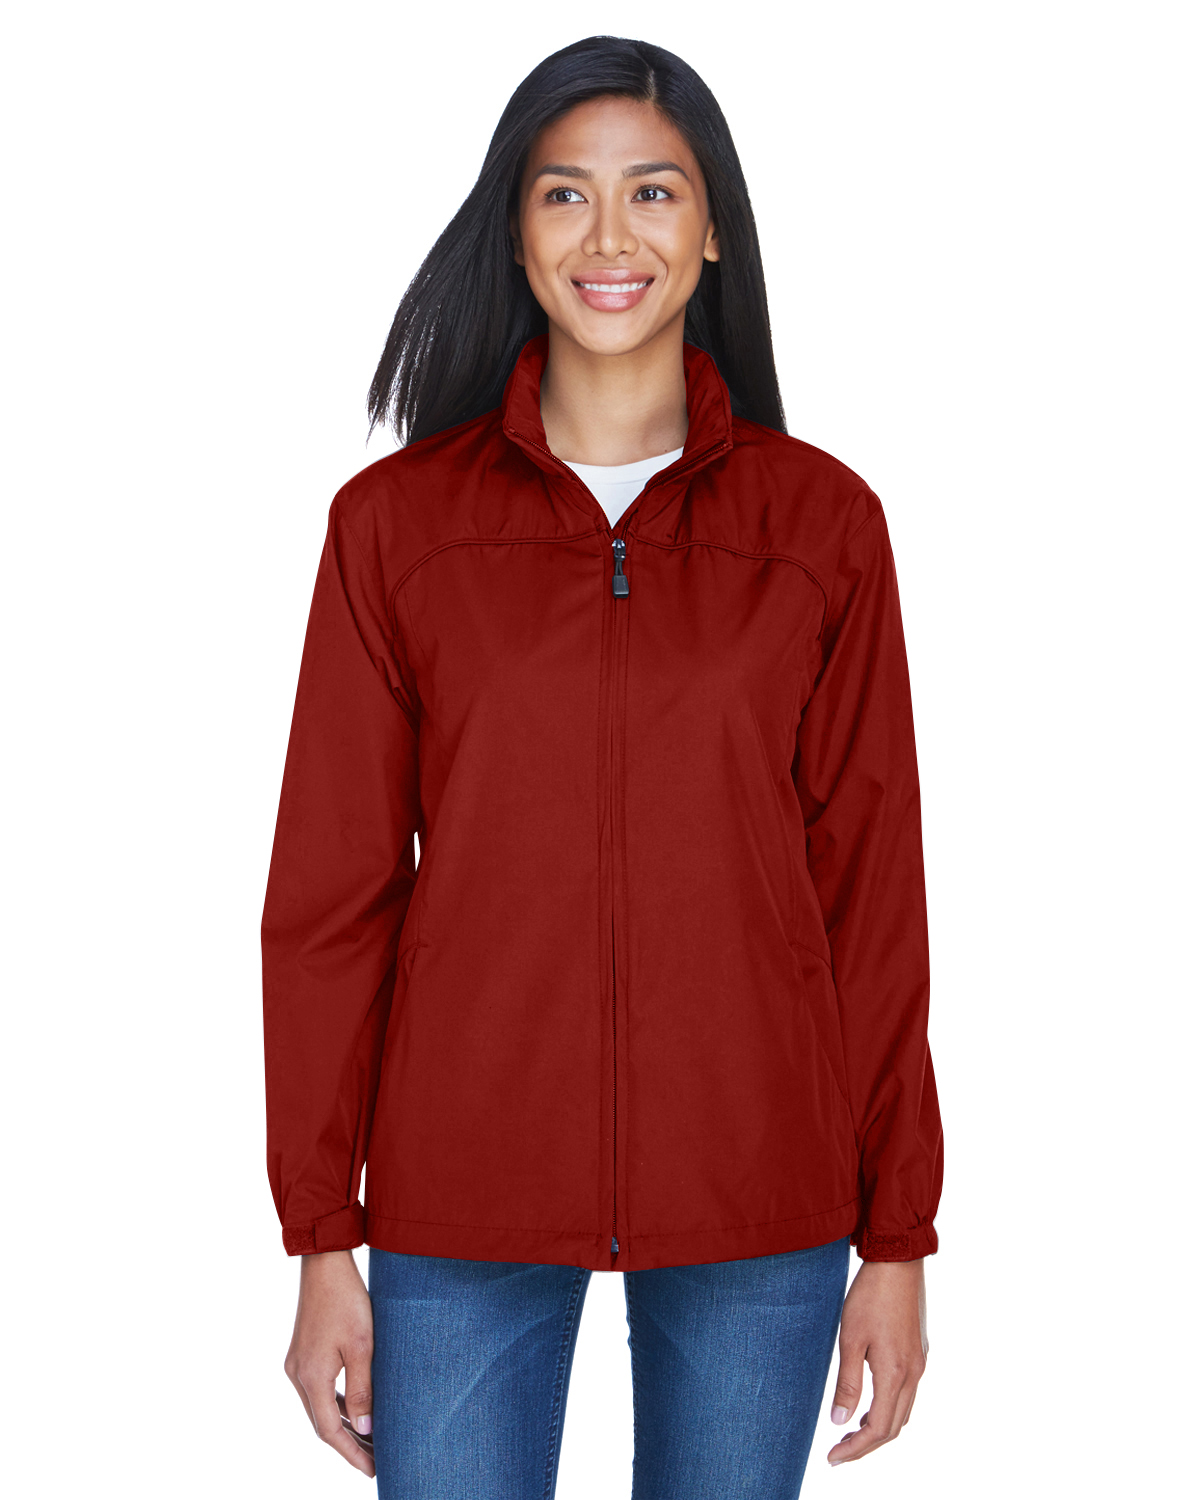 The Ash City - North End Ladies' Techno Lite Jacket - MOLTEN RED 751 - L - image 1 of 2